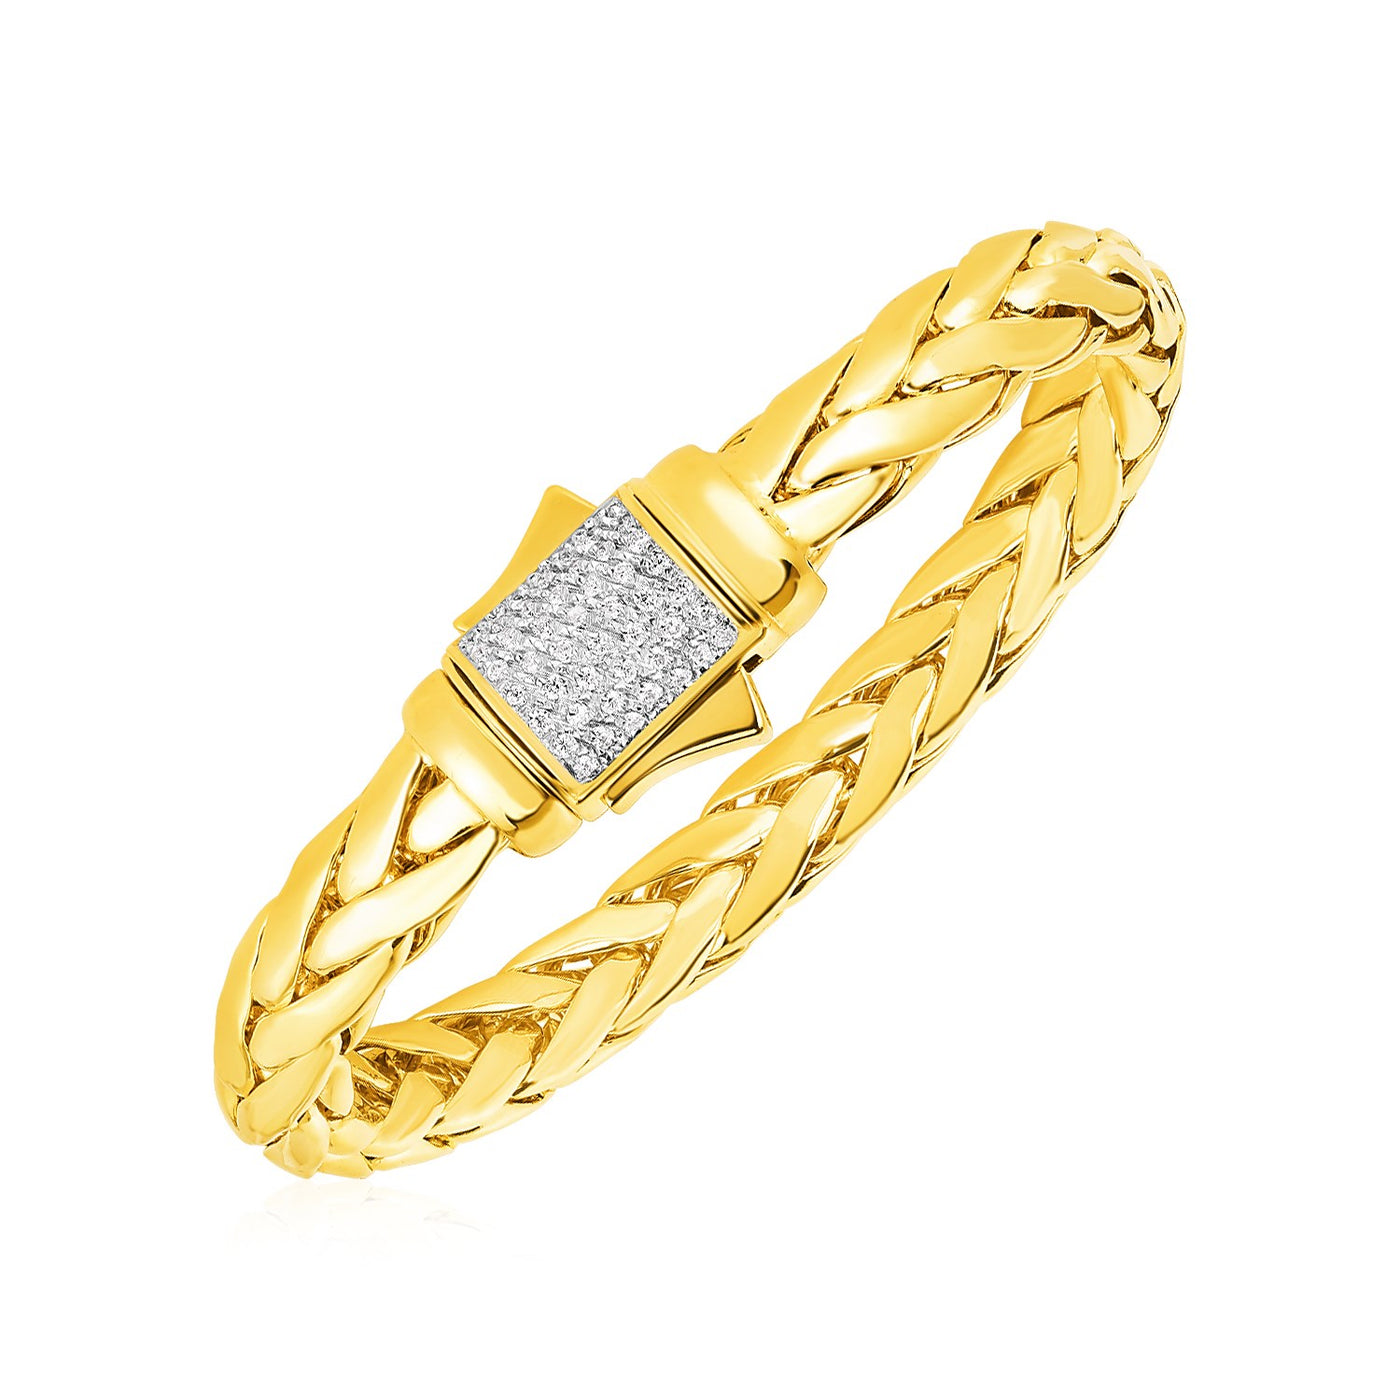 Woven Rope Bracelet with Diamond Accented Clasp in 14k Yellow Gold